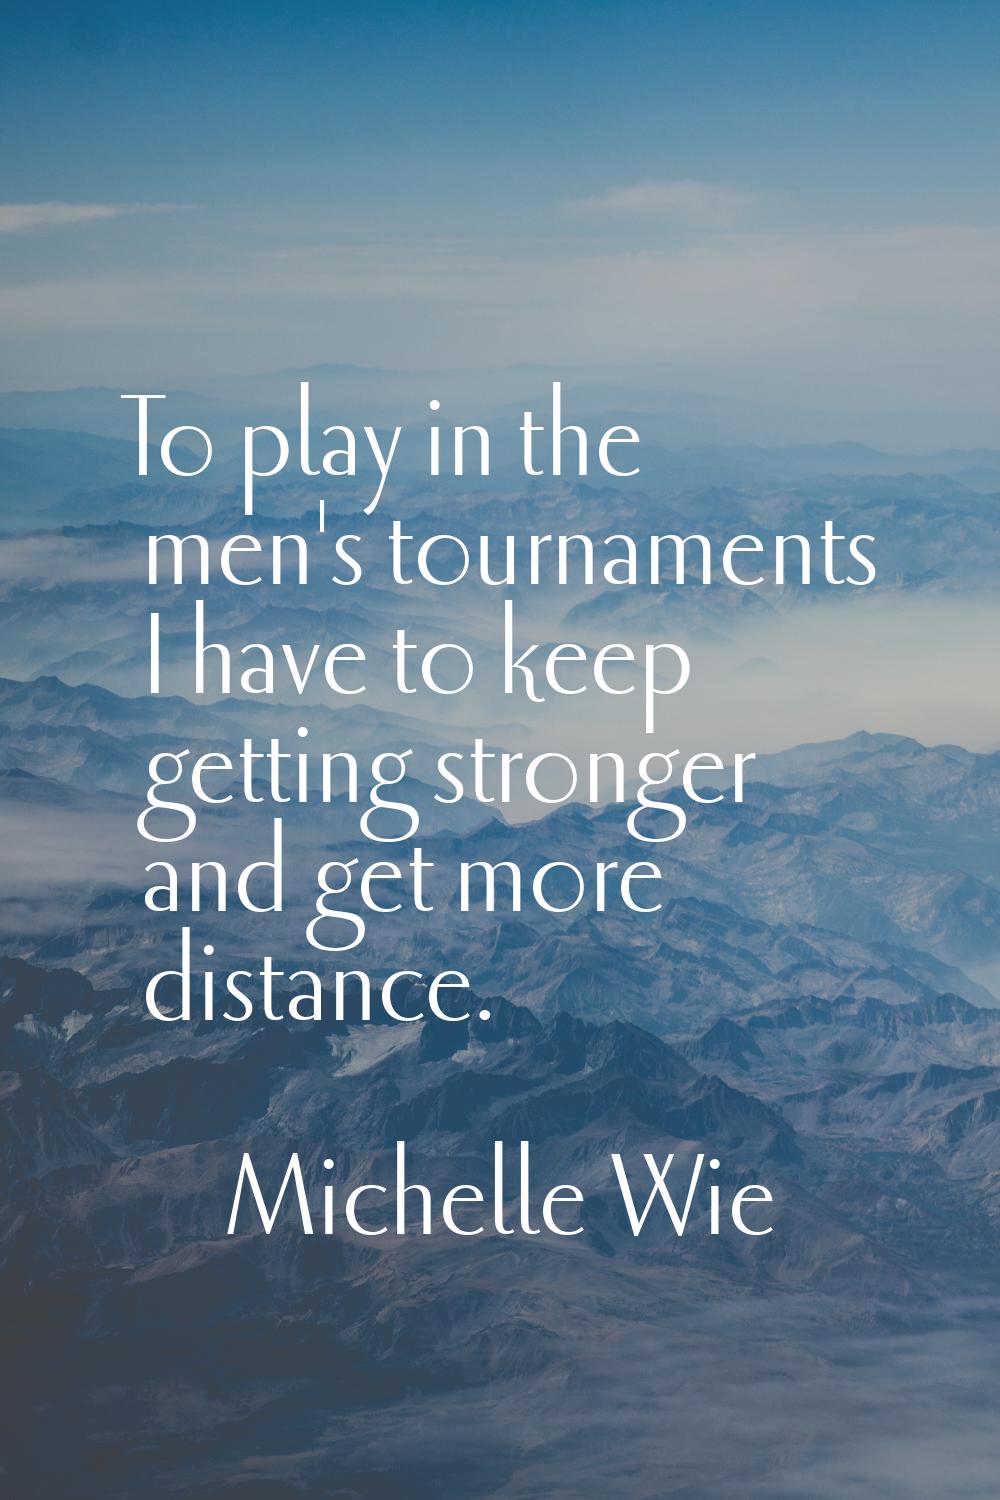 To play in the men's tournaments I have to keep getting stronger and get more distance.